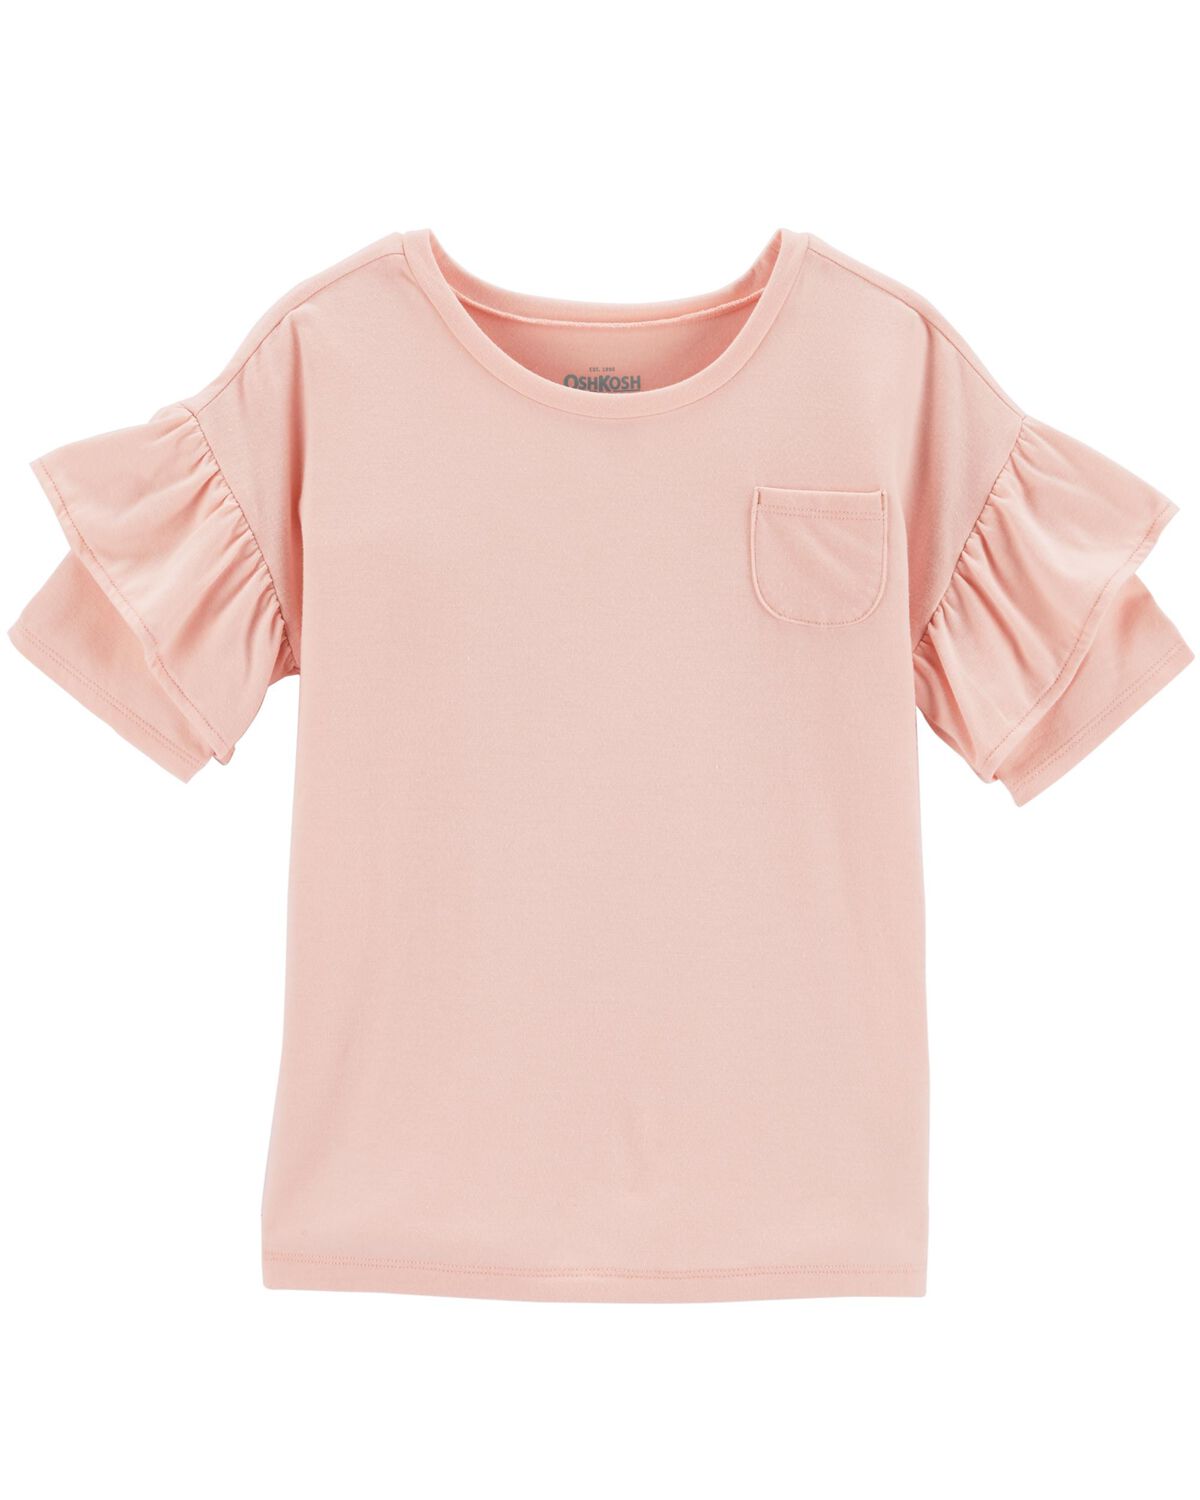 Double Ruffle Tee, Lavender, hi-res